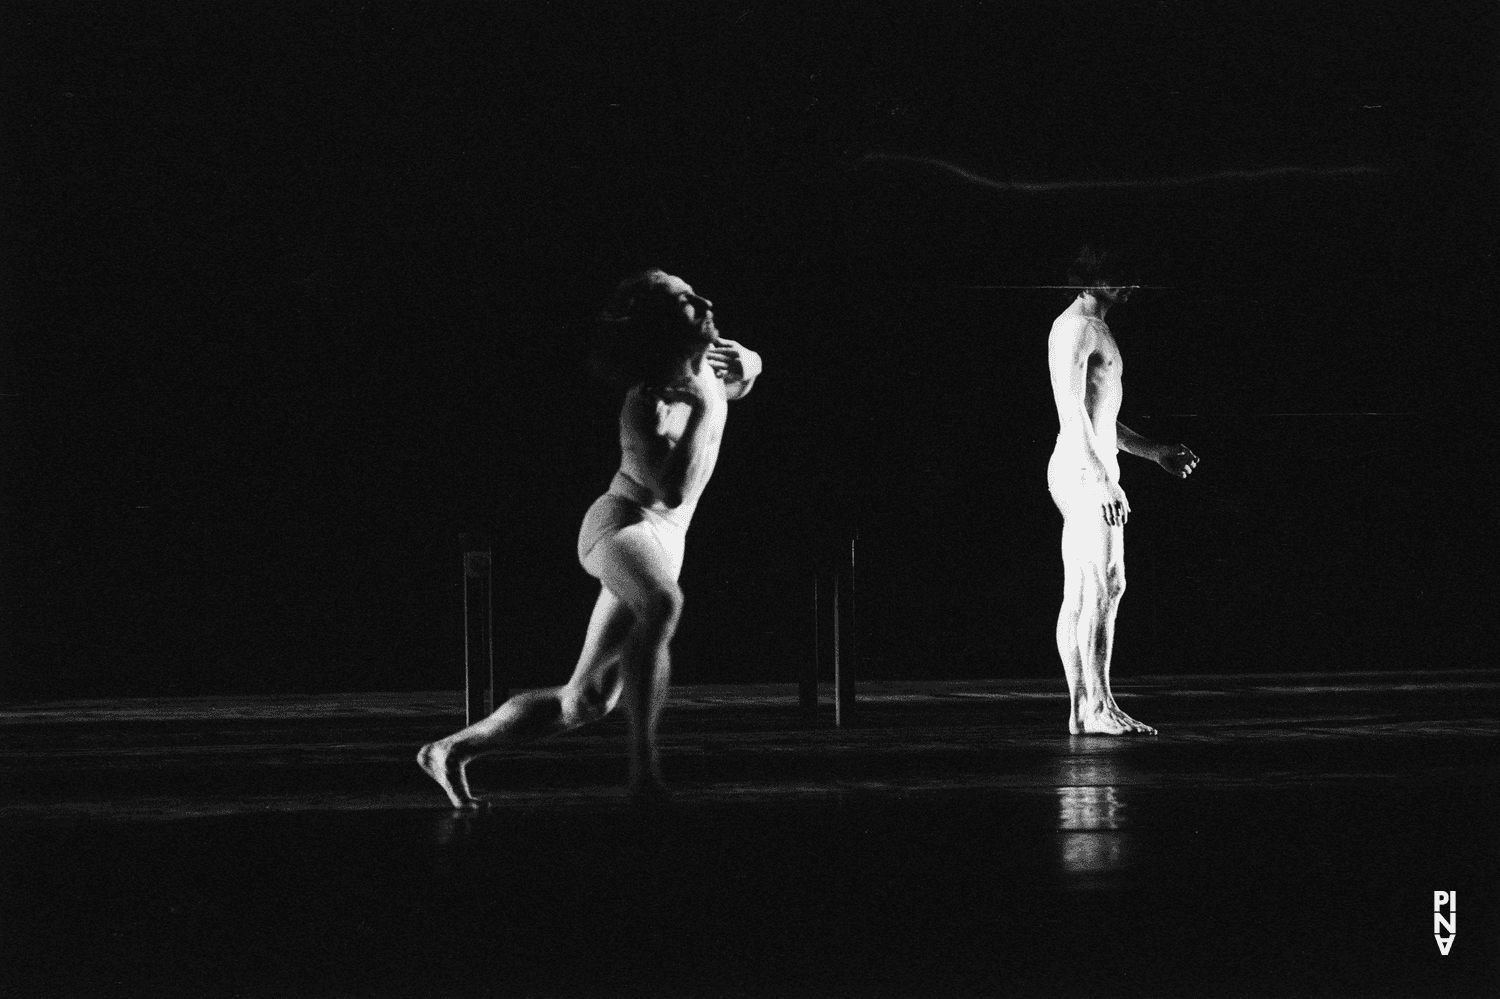 Dominique Mercy and Ed Kortlandt in “Iphigenie auf Tauris” by Pina Bausch at Opernhaus Wuppertal, April 20, 1974